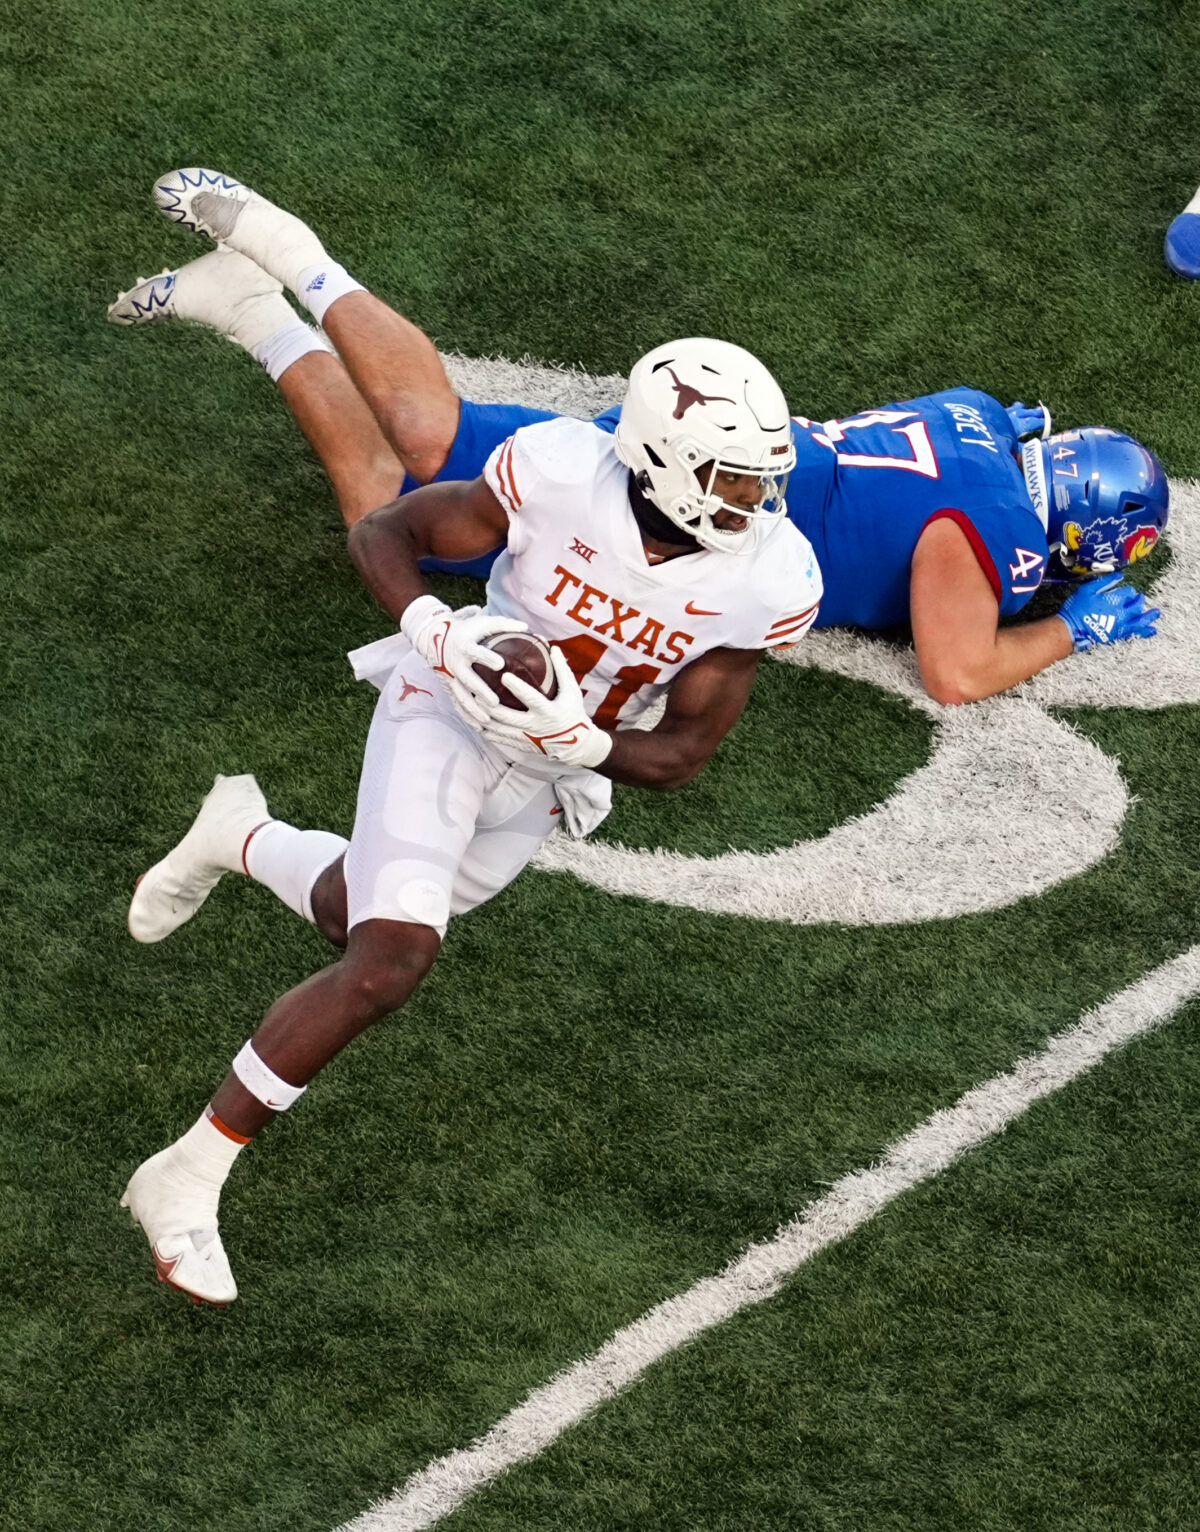 No. 3 Texas is the 16.5-point favorite over No. 24 Kansas